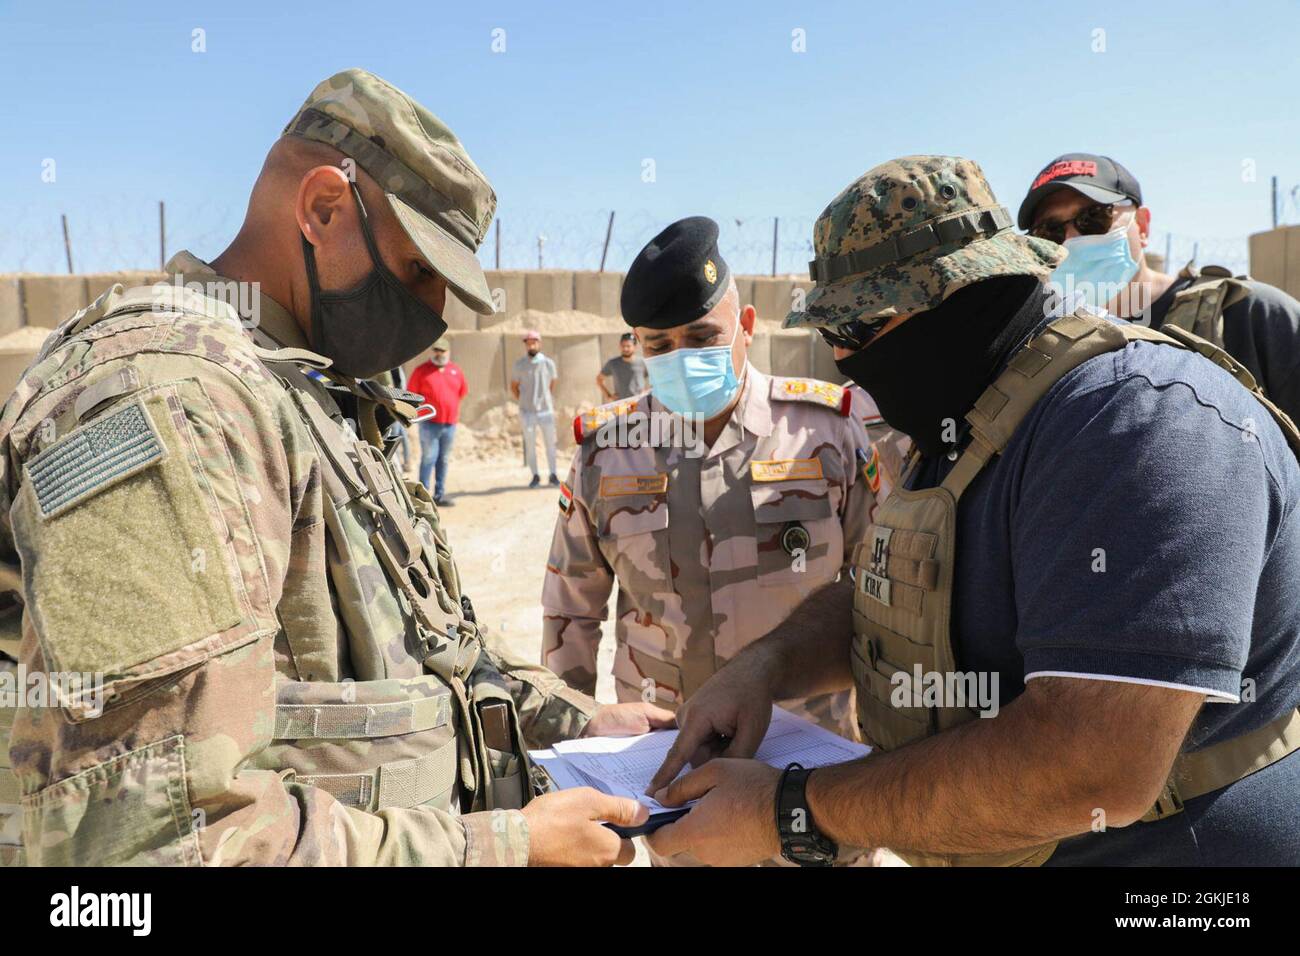 U.S. Army Officer 2LT Rudolph DaRocha reviews the inventory with Ministry of Defense 1st Division Commander BG Hassan Mohamed Zidan Khalaf AL-KARWI. Counter-ISIS Train and Equip Fund program provides vehicles to Iraqi partner forces valued at $9,519,740.00 of 36 M1151A1's and 20 Land Cruisers at Al Asad Air Base on May 1, 2021. The U.S. CTEF program supports Iraqi partner forces with equipment to enhance their fight against hostile D'aesh forces. Stock Photo